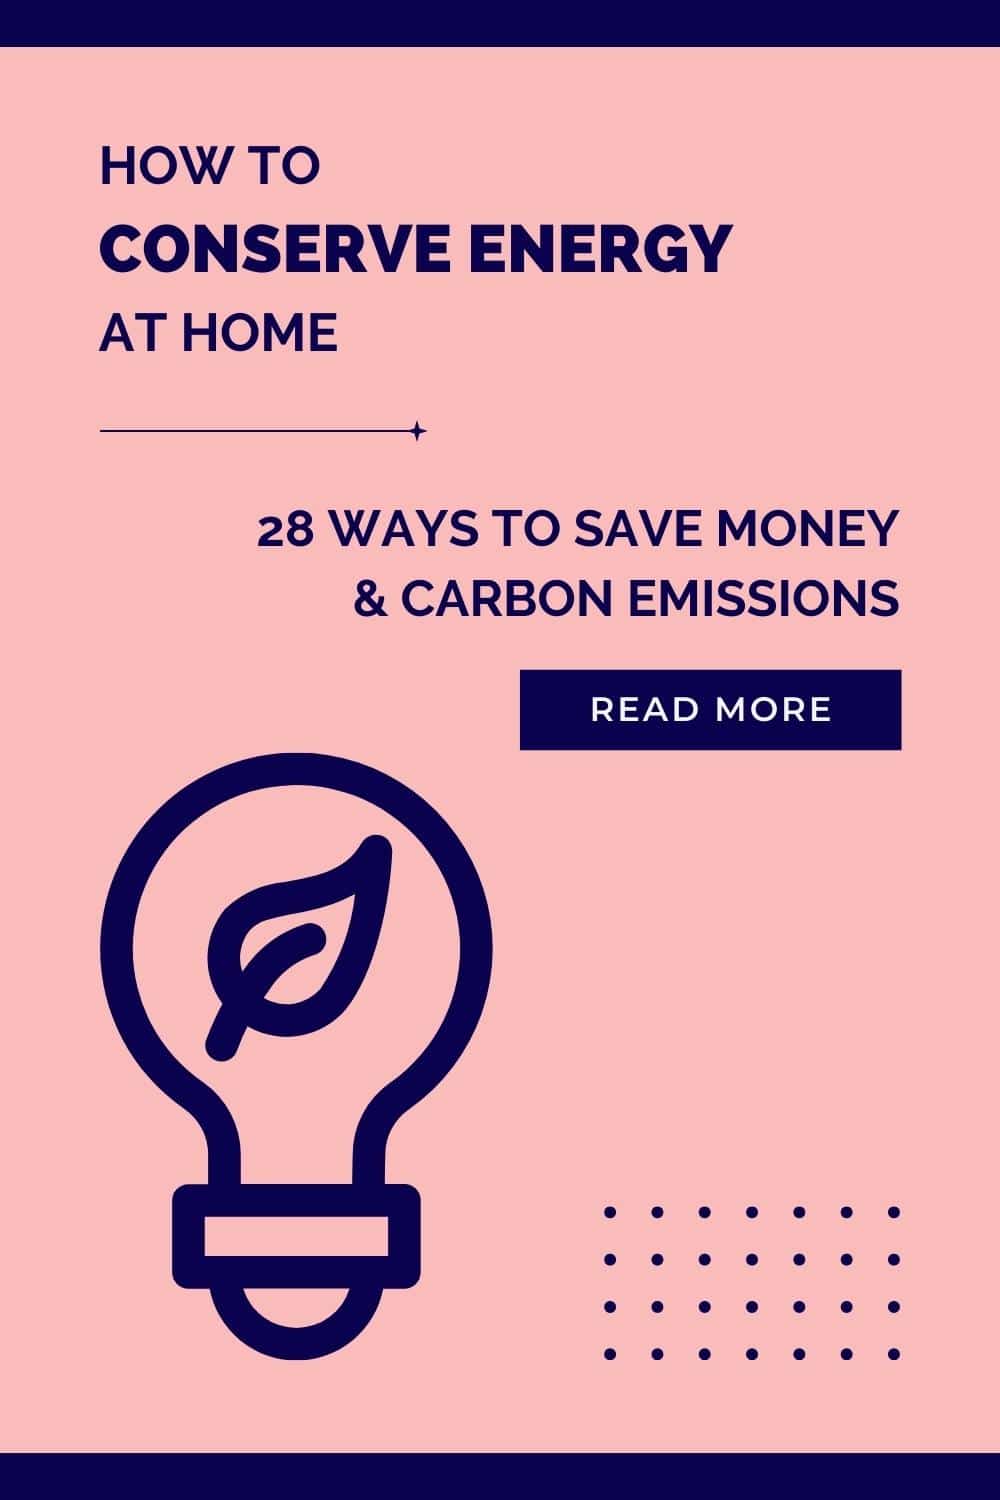 How to conserve energy at home to save money